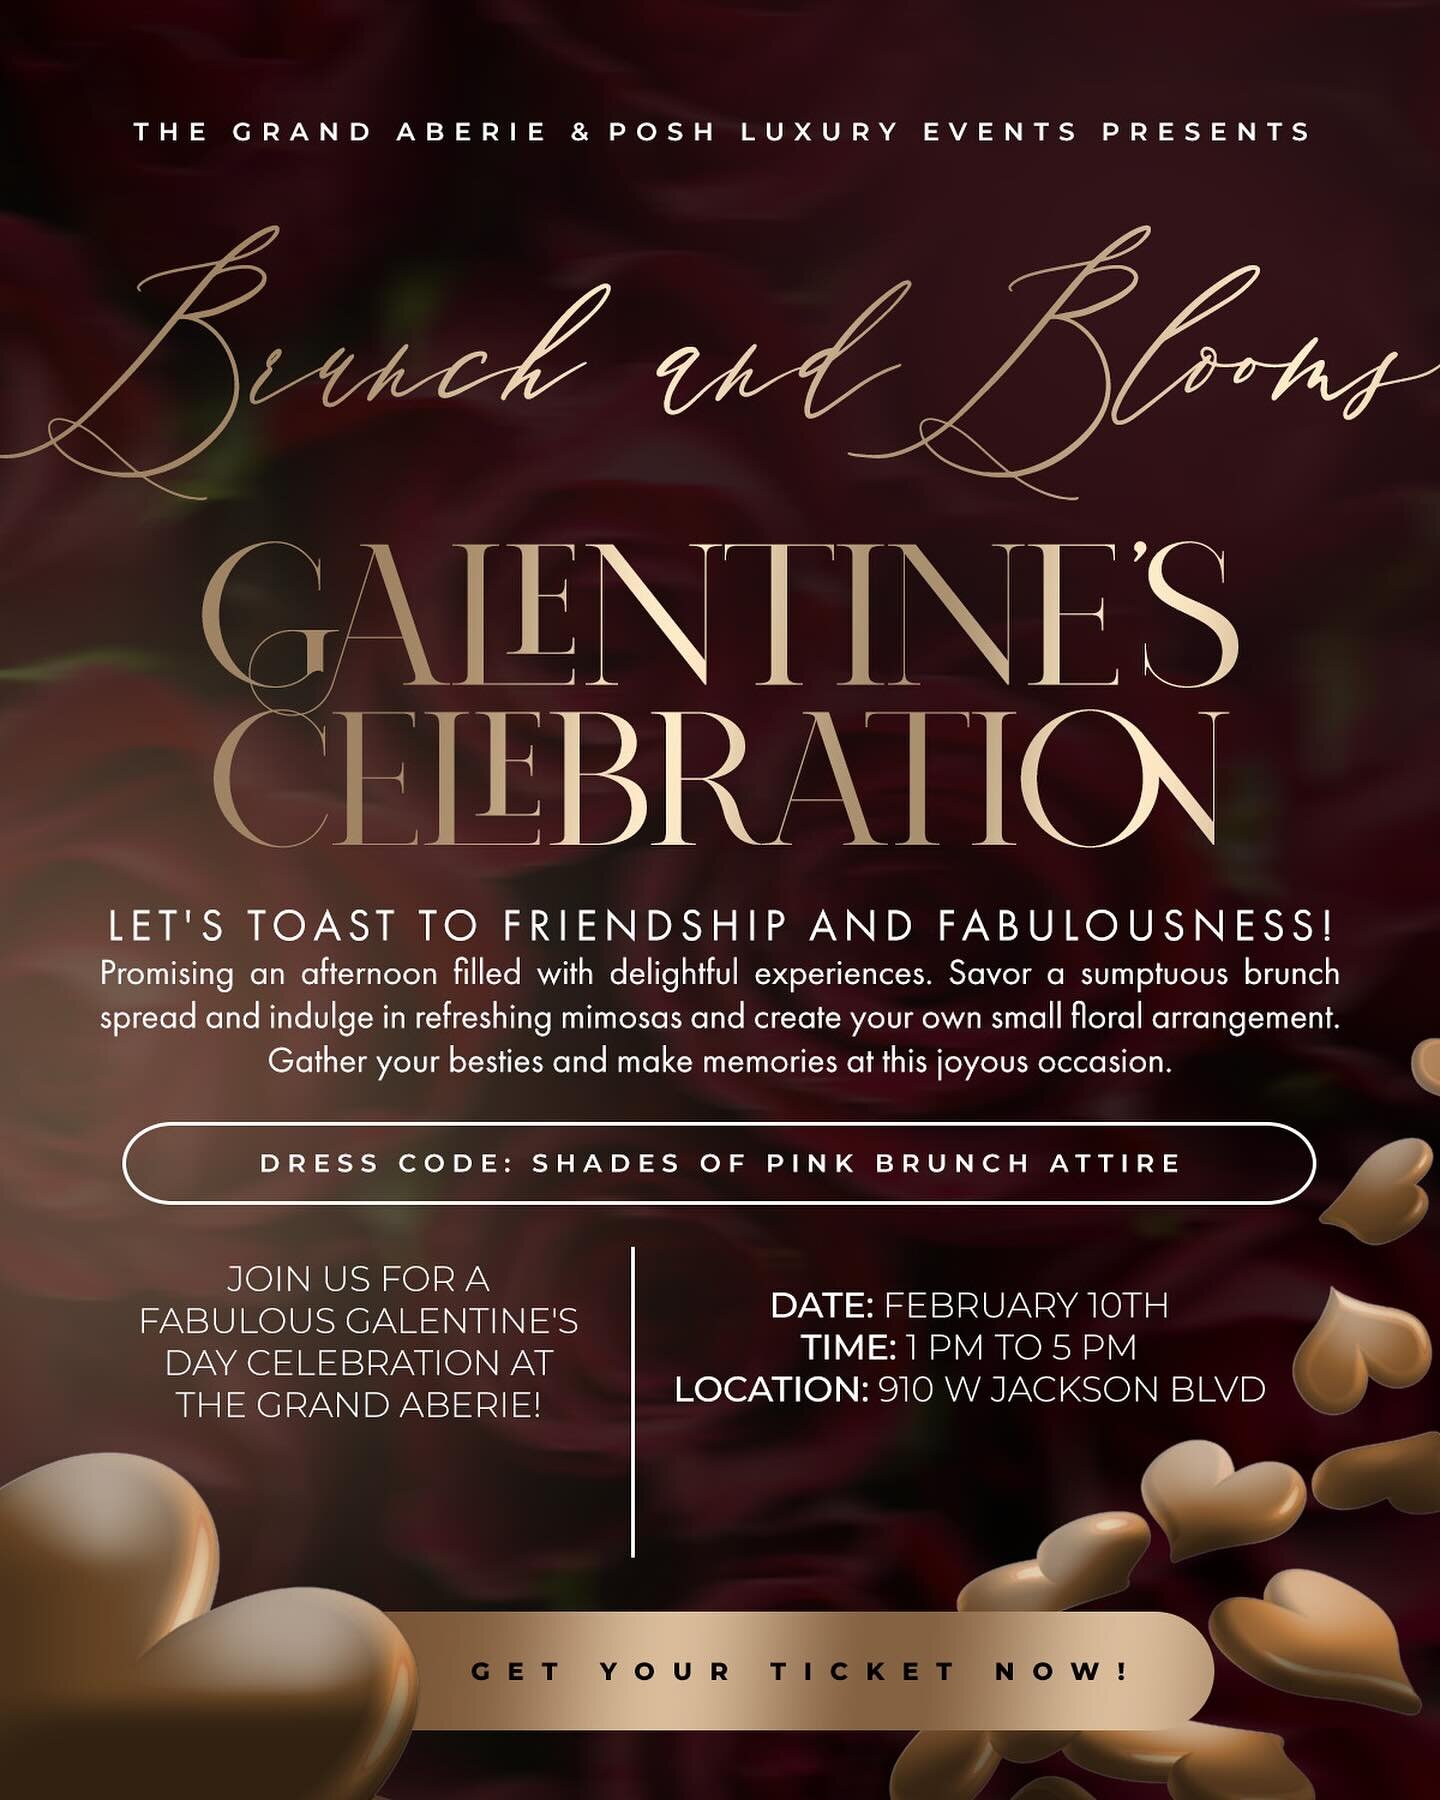 🚨Tickets are NOW on sell! 

Grab your besties and come enjoy a dope vibe full of fun, laughter, good food, good drinks, luxury experiences and so much more at The Brunch &amp; Blooms Galentine&rsquo;s Day Celebration hosted by @poshluxuryevents and 